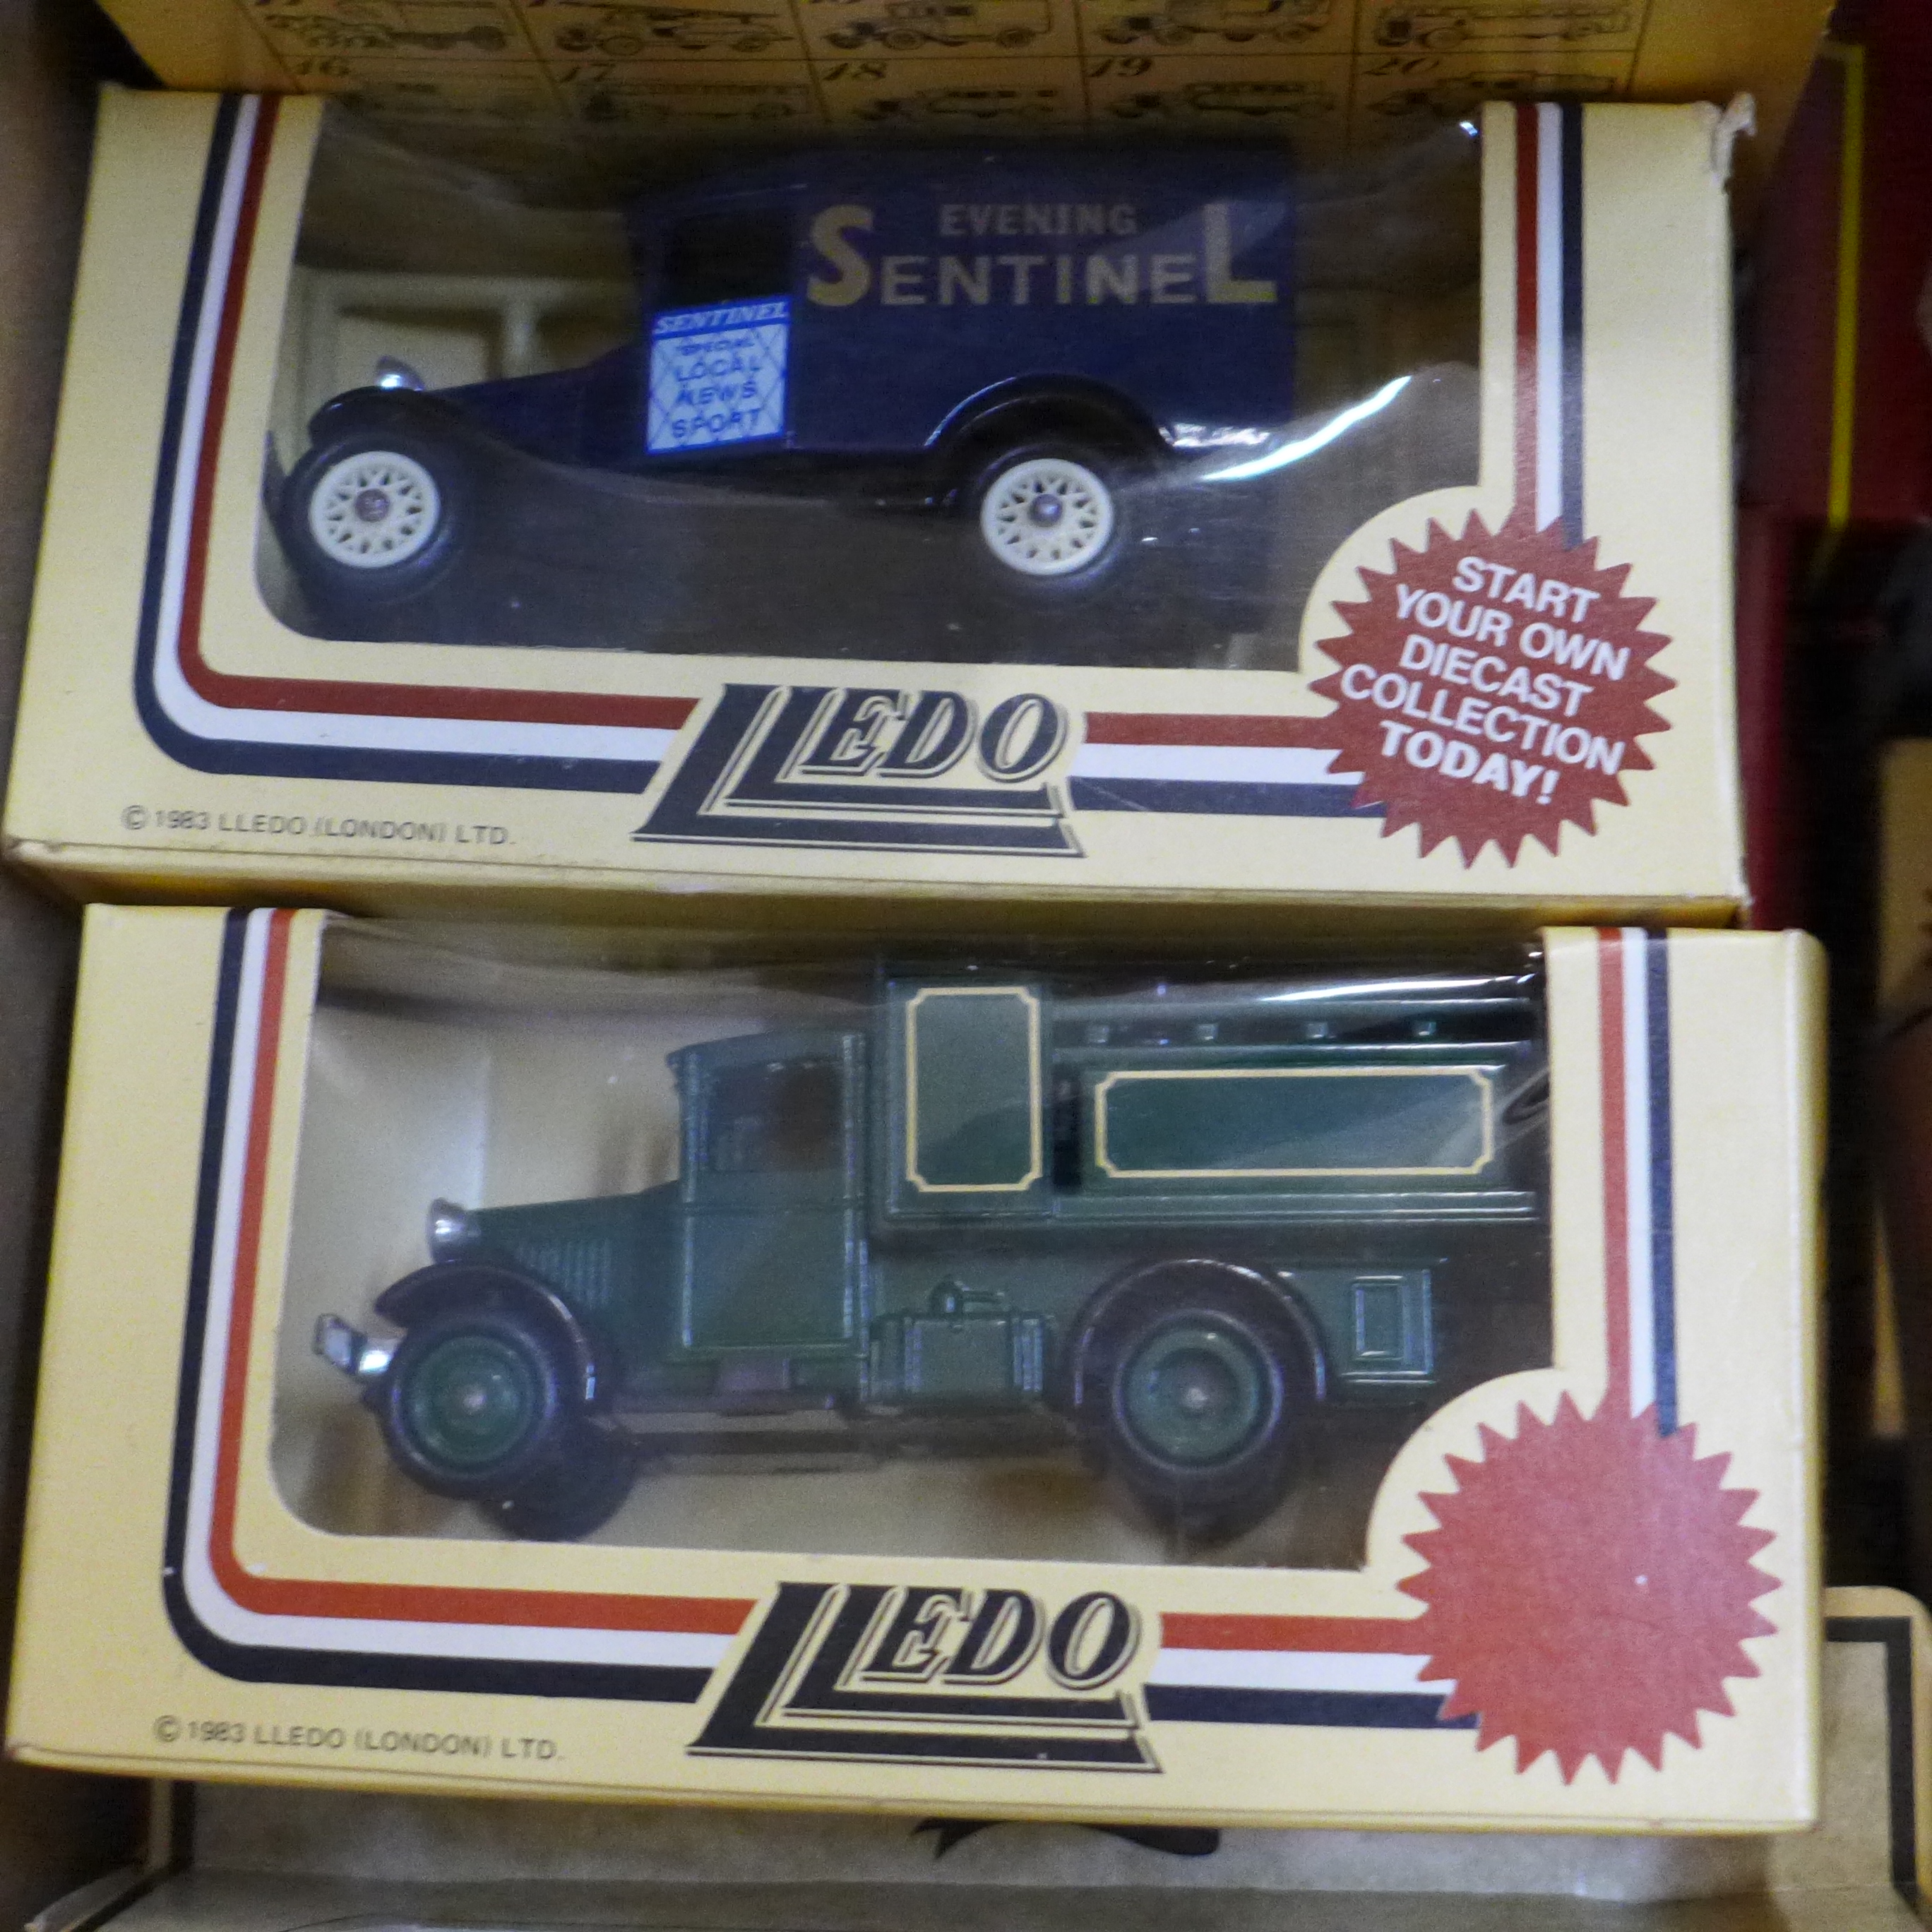 A collection of die-cast model vehicles, boxed; Lledo, Days Gone, Promotional, etc. - Image 2 of 4